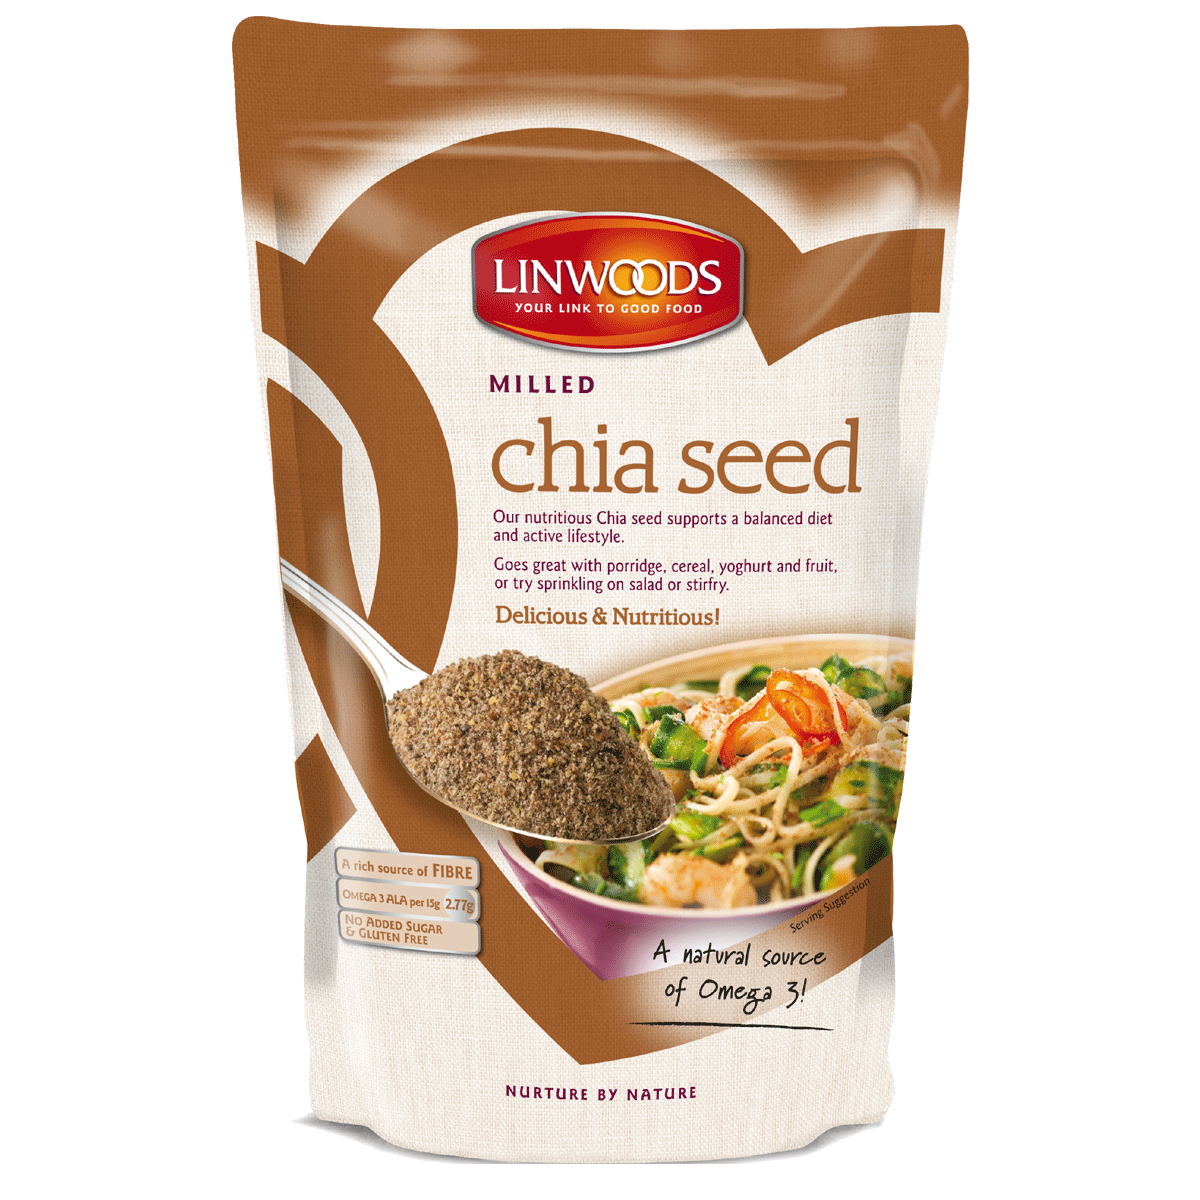 Linwoods Milled Chia Seeds 200g - Just Natural